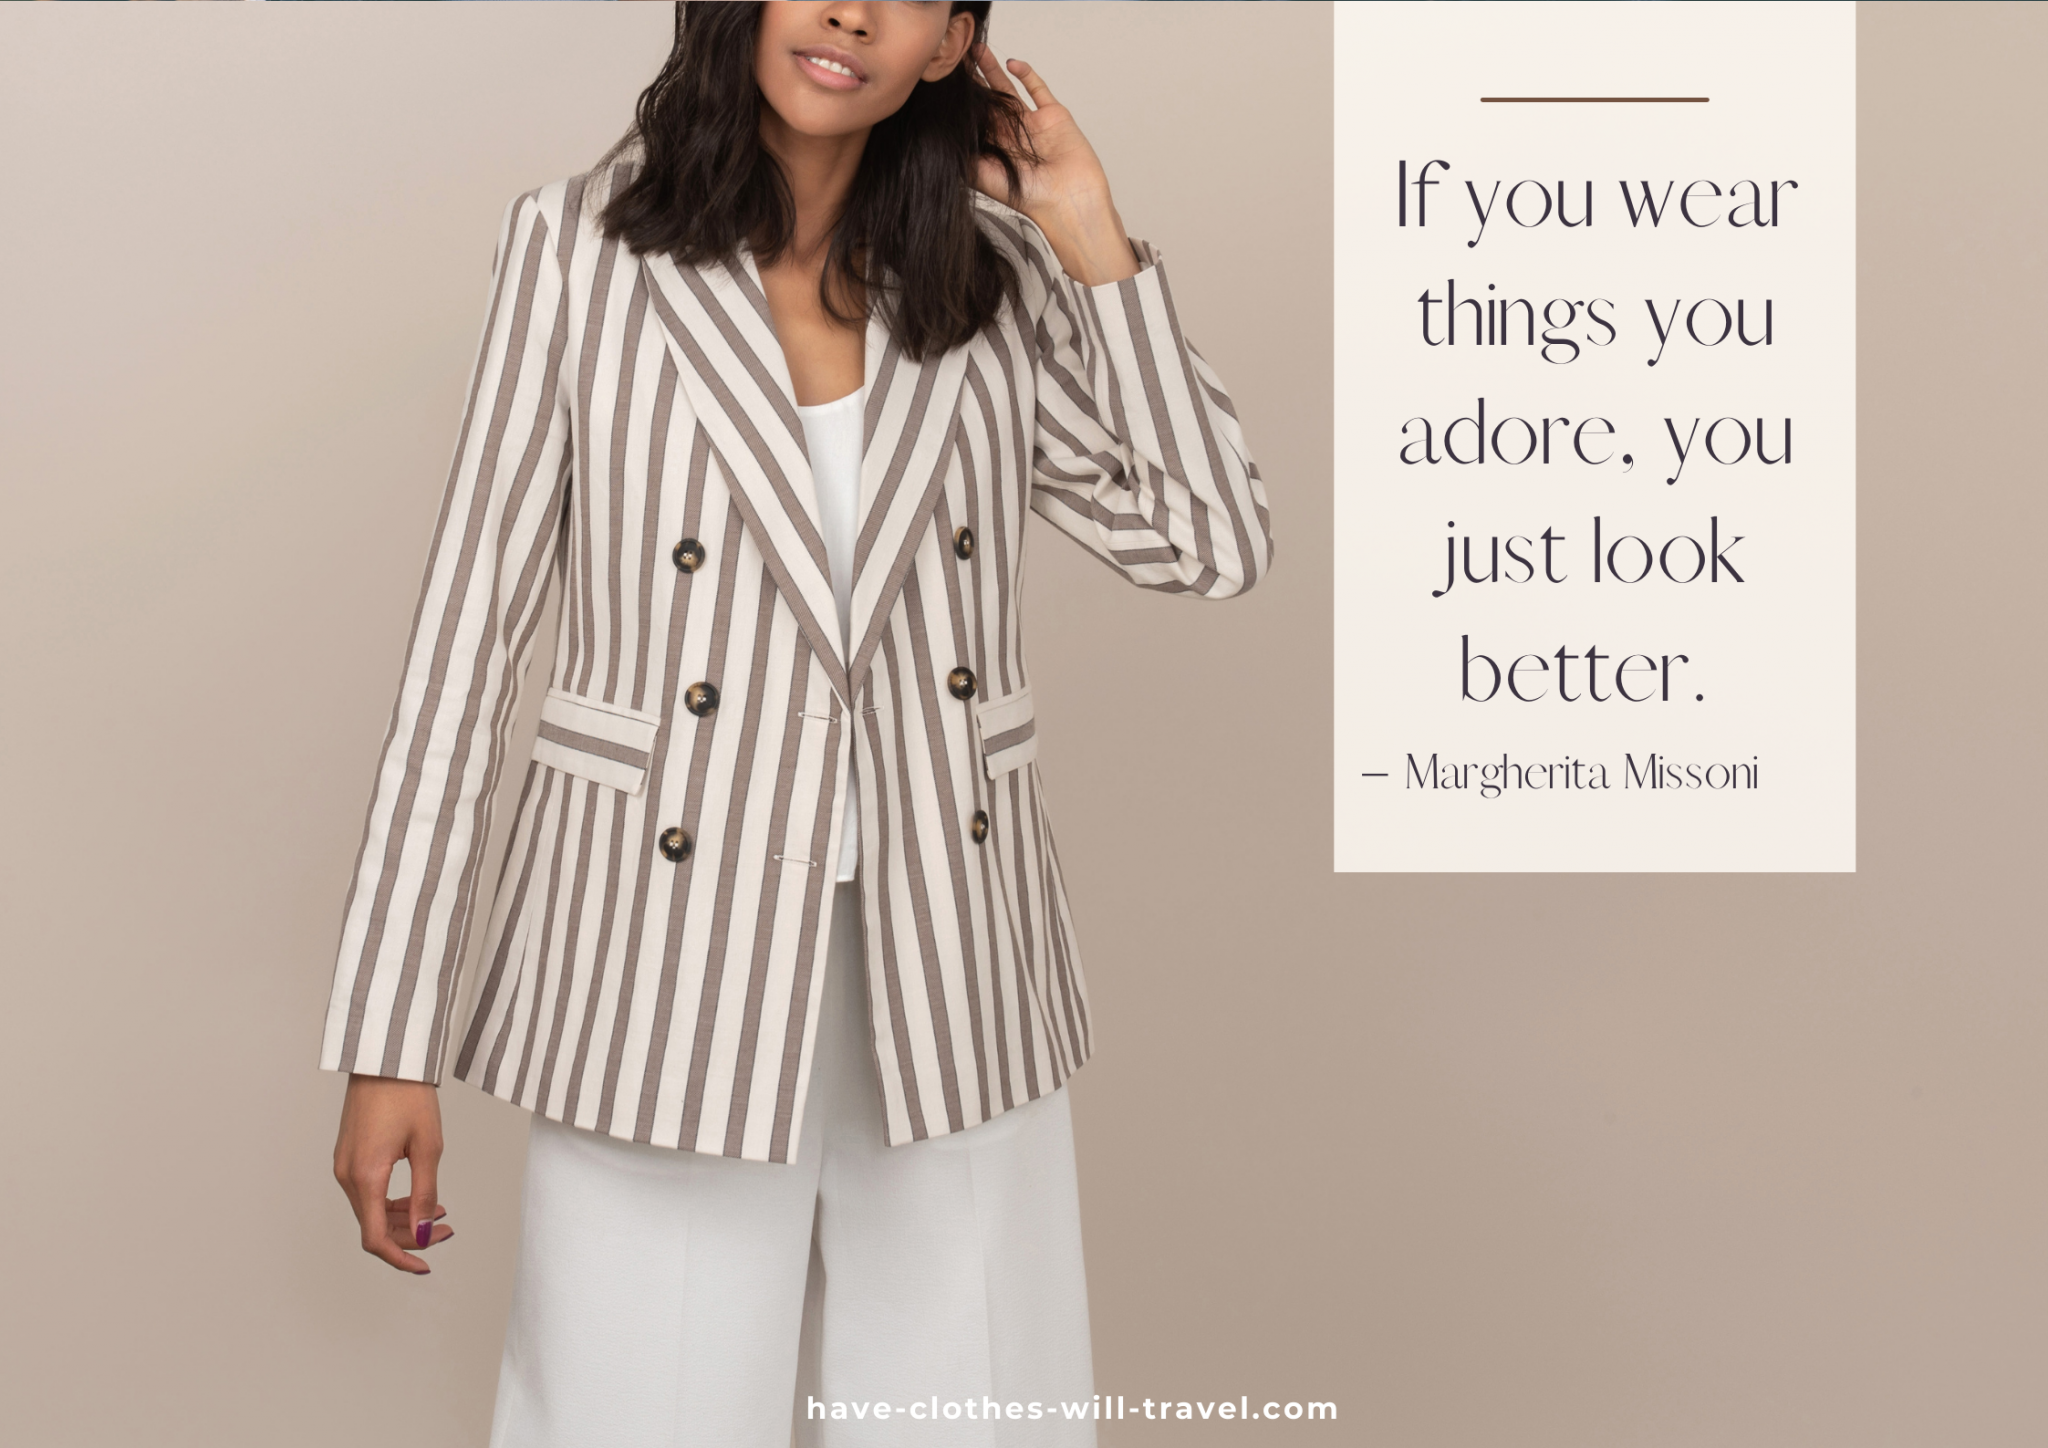 A model poses in front of a neutral background, wearing a white and brown striped blazer over white top and pants. Text on the image says, "If you wear things you adore, you just look better. – Margherita Missoni"